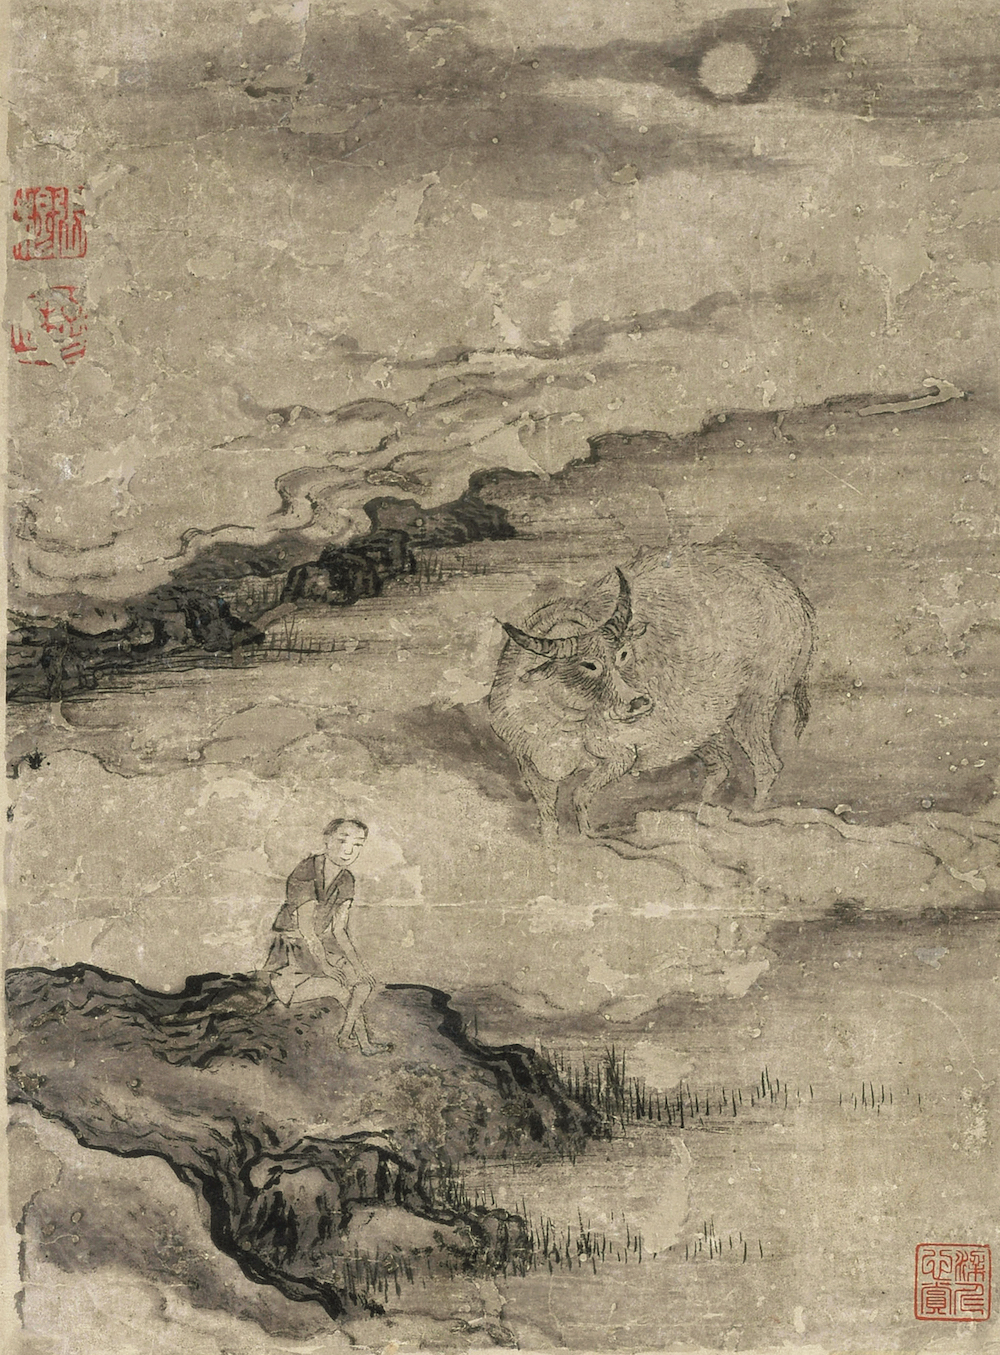 (Ming) Zhang Mu, Cattle Atlas, Xiang Forgetting, ink and color on paper, vertical 23.7 cm, horizontal 17.7 cm, donated by Mr. Yang Quan, collected by Guangzhou Art Museum